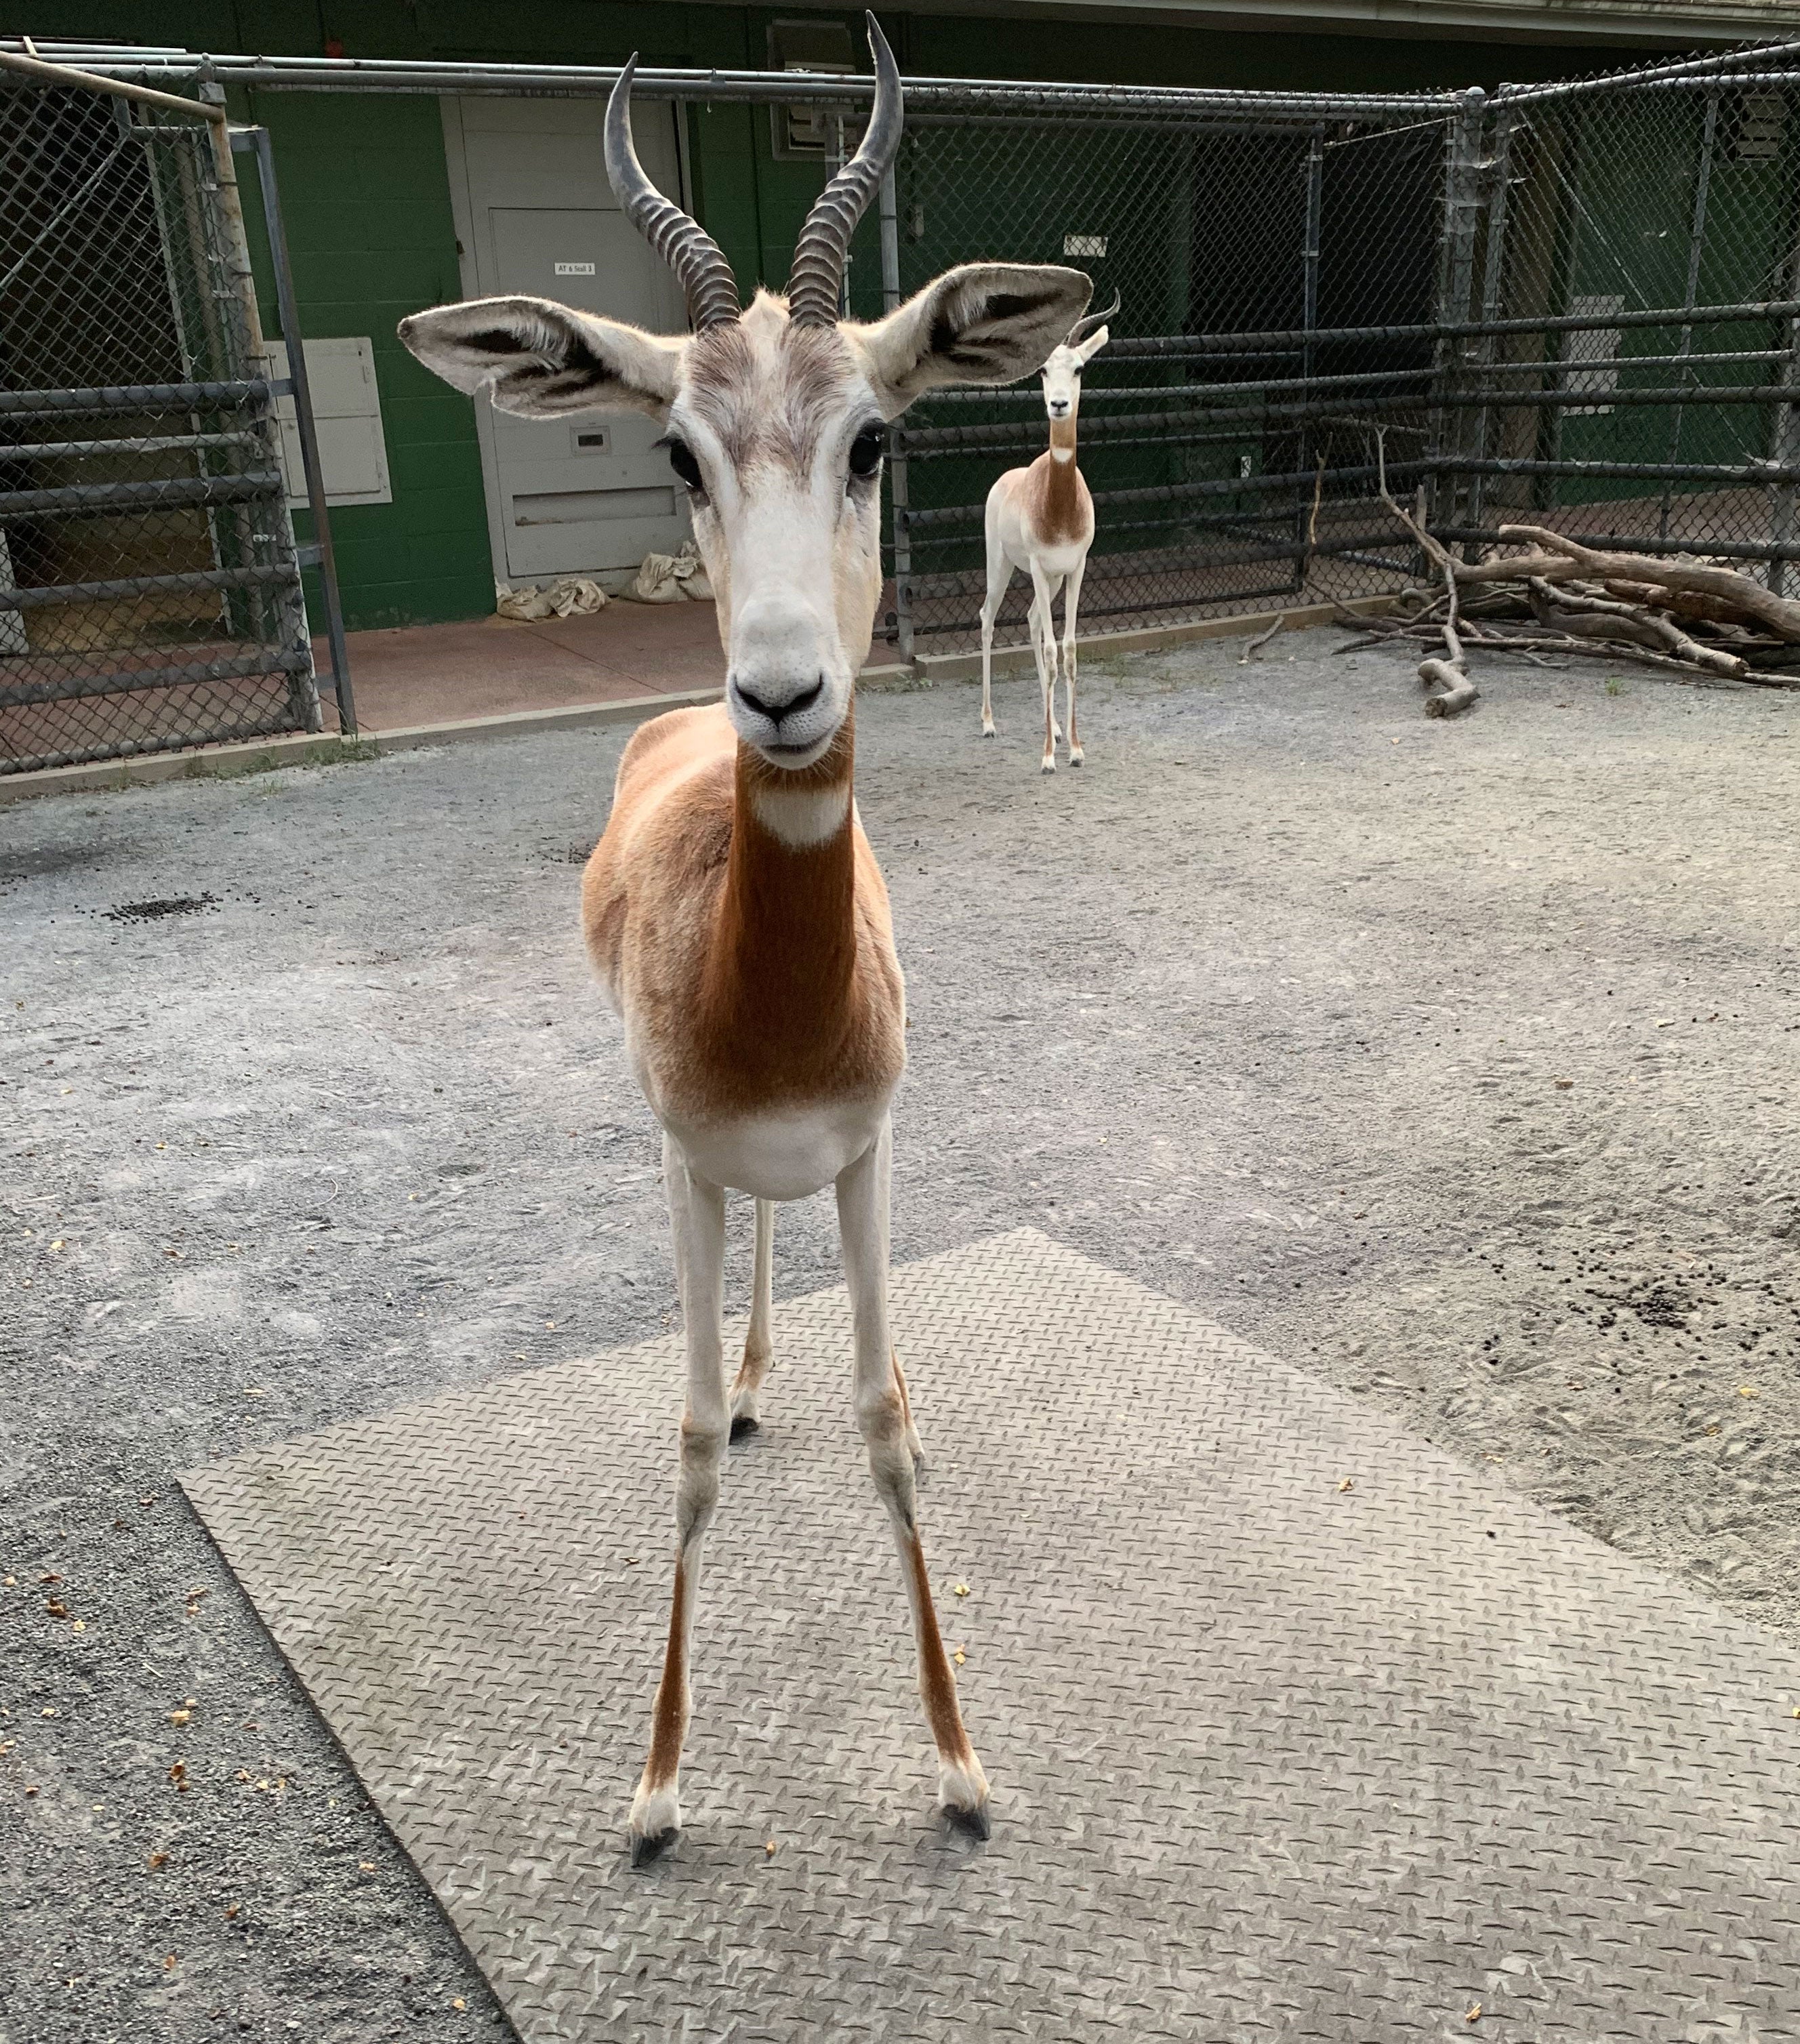 A 2-year-old dama gazelle with long, slender legs, hooved feet, brown and white fur, and short, curved horns stands on a rough-textured mat during a training session